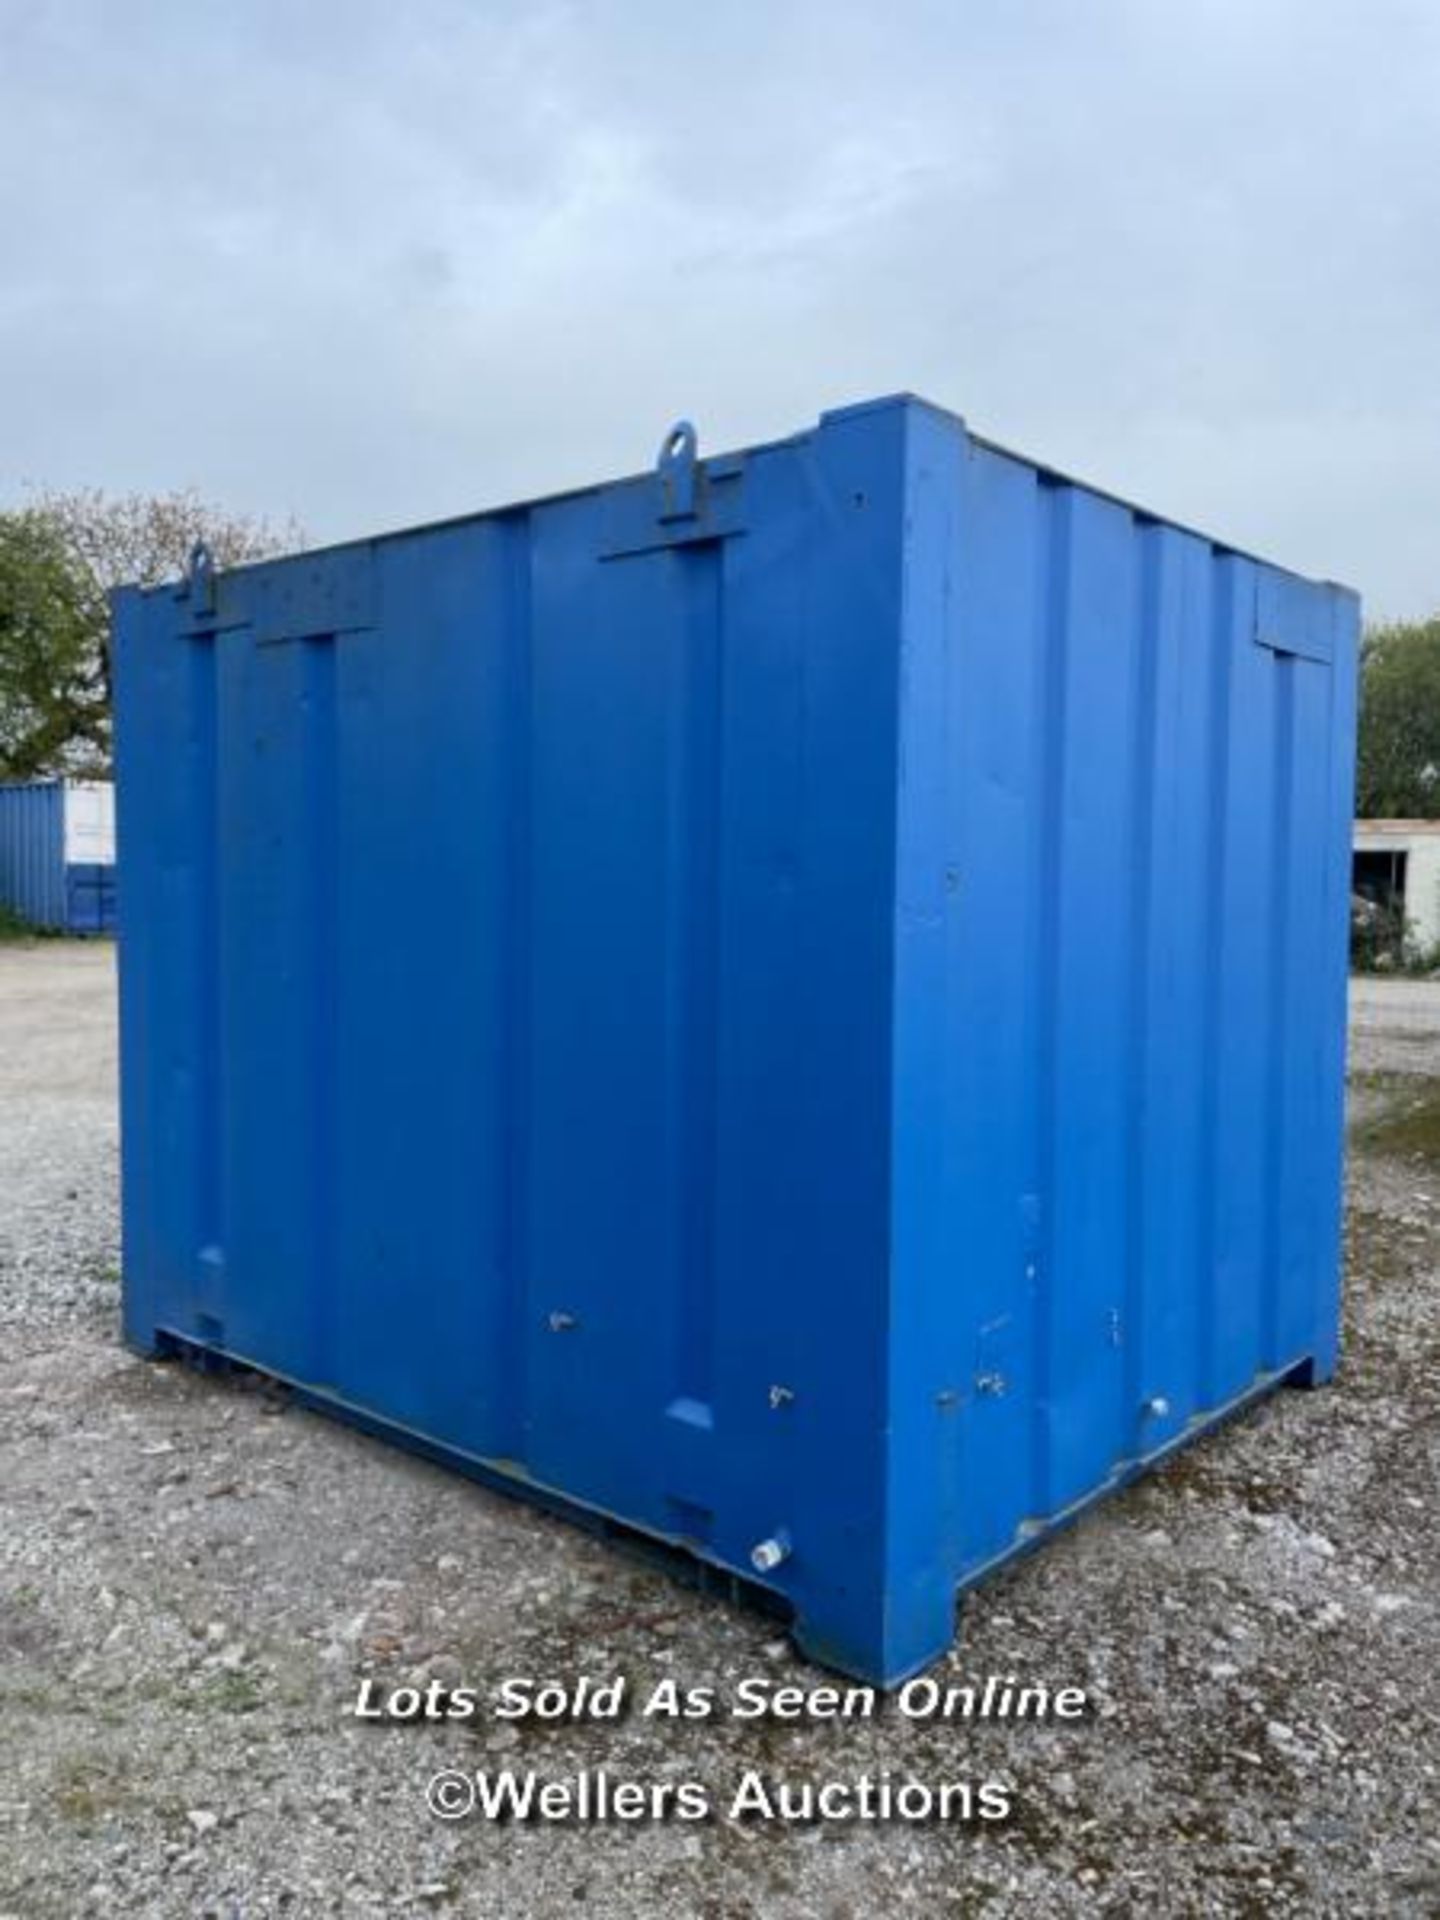 10' X 8' PORTABLE STEEL SHOWER BLOCK, UNIT INCLUDES HYCO EXTRACTION FAN, ELECTRICAL SWITCHBOARD, - Image 5 of 16